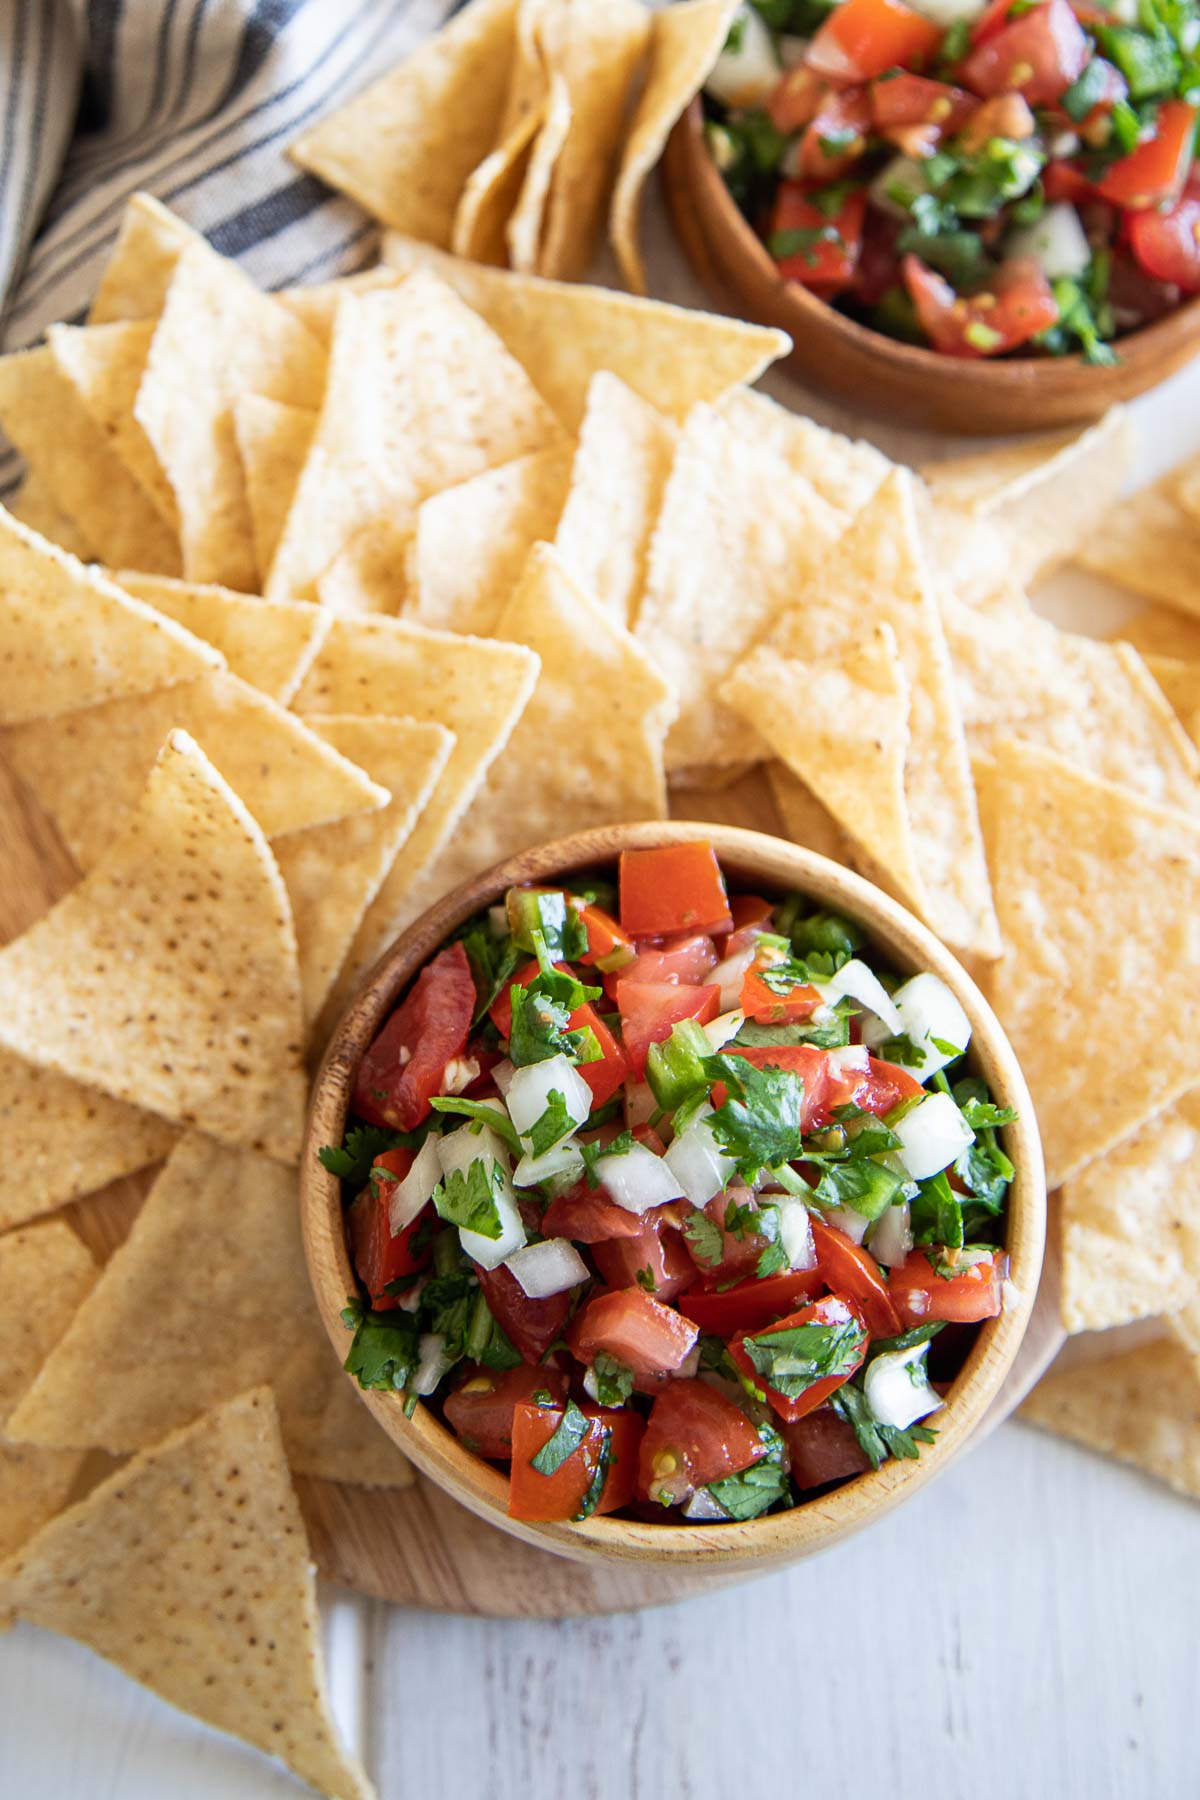 Looking down at Homemade Pico de Gallo Salsa and Chips. Appetizer.